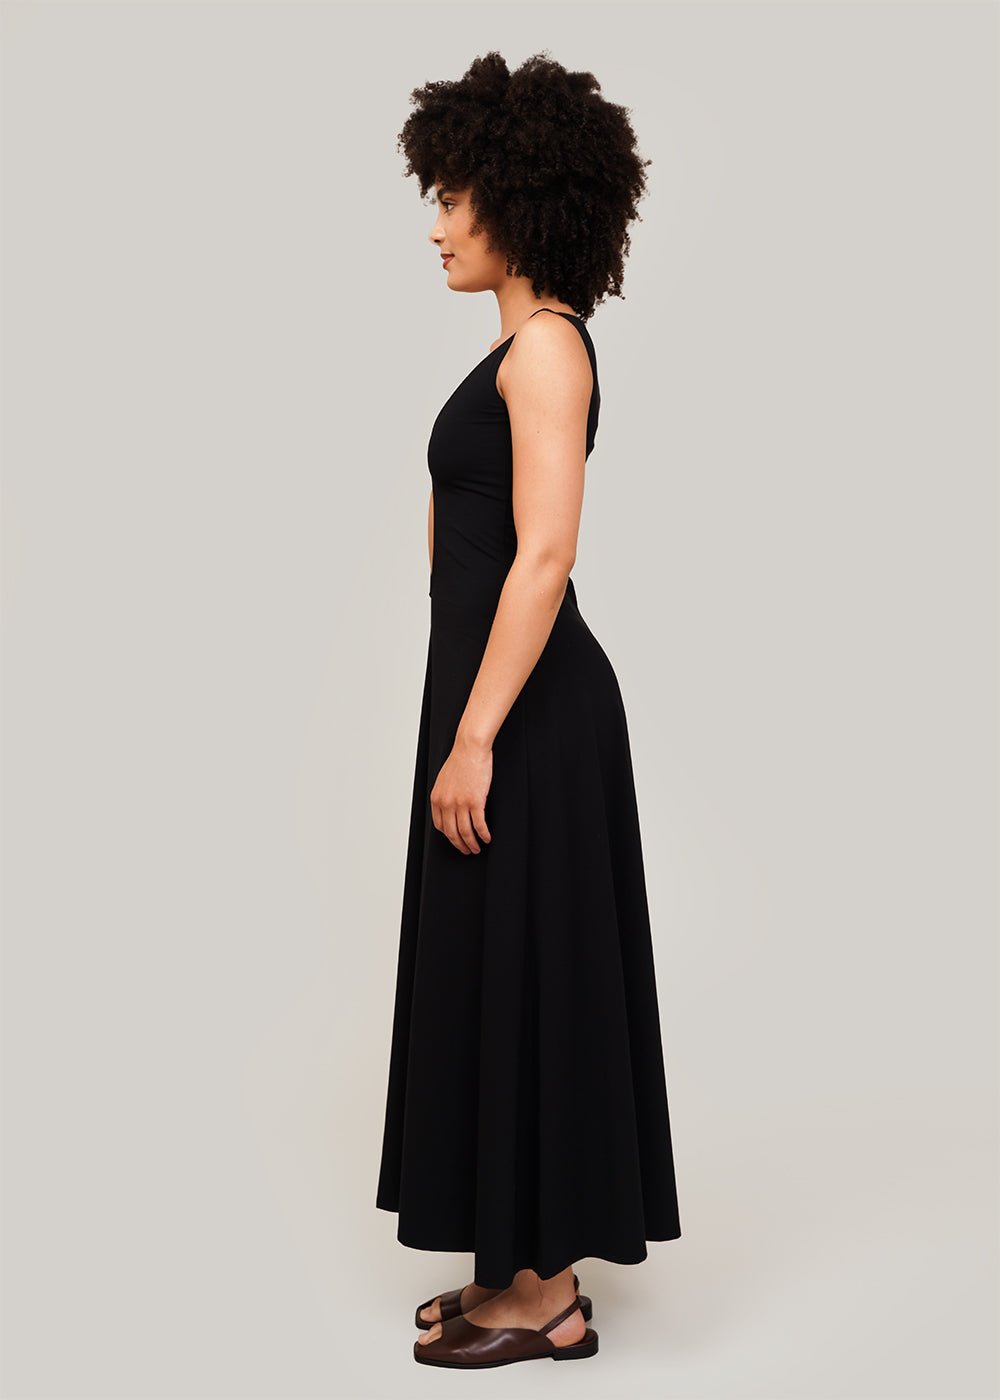 Beaufille Black Twain Dress - New Classics Studios Sustainable Ethical Fashion Canada